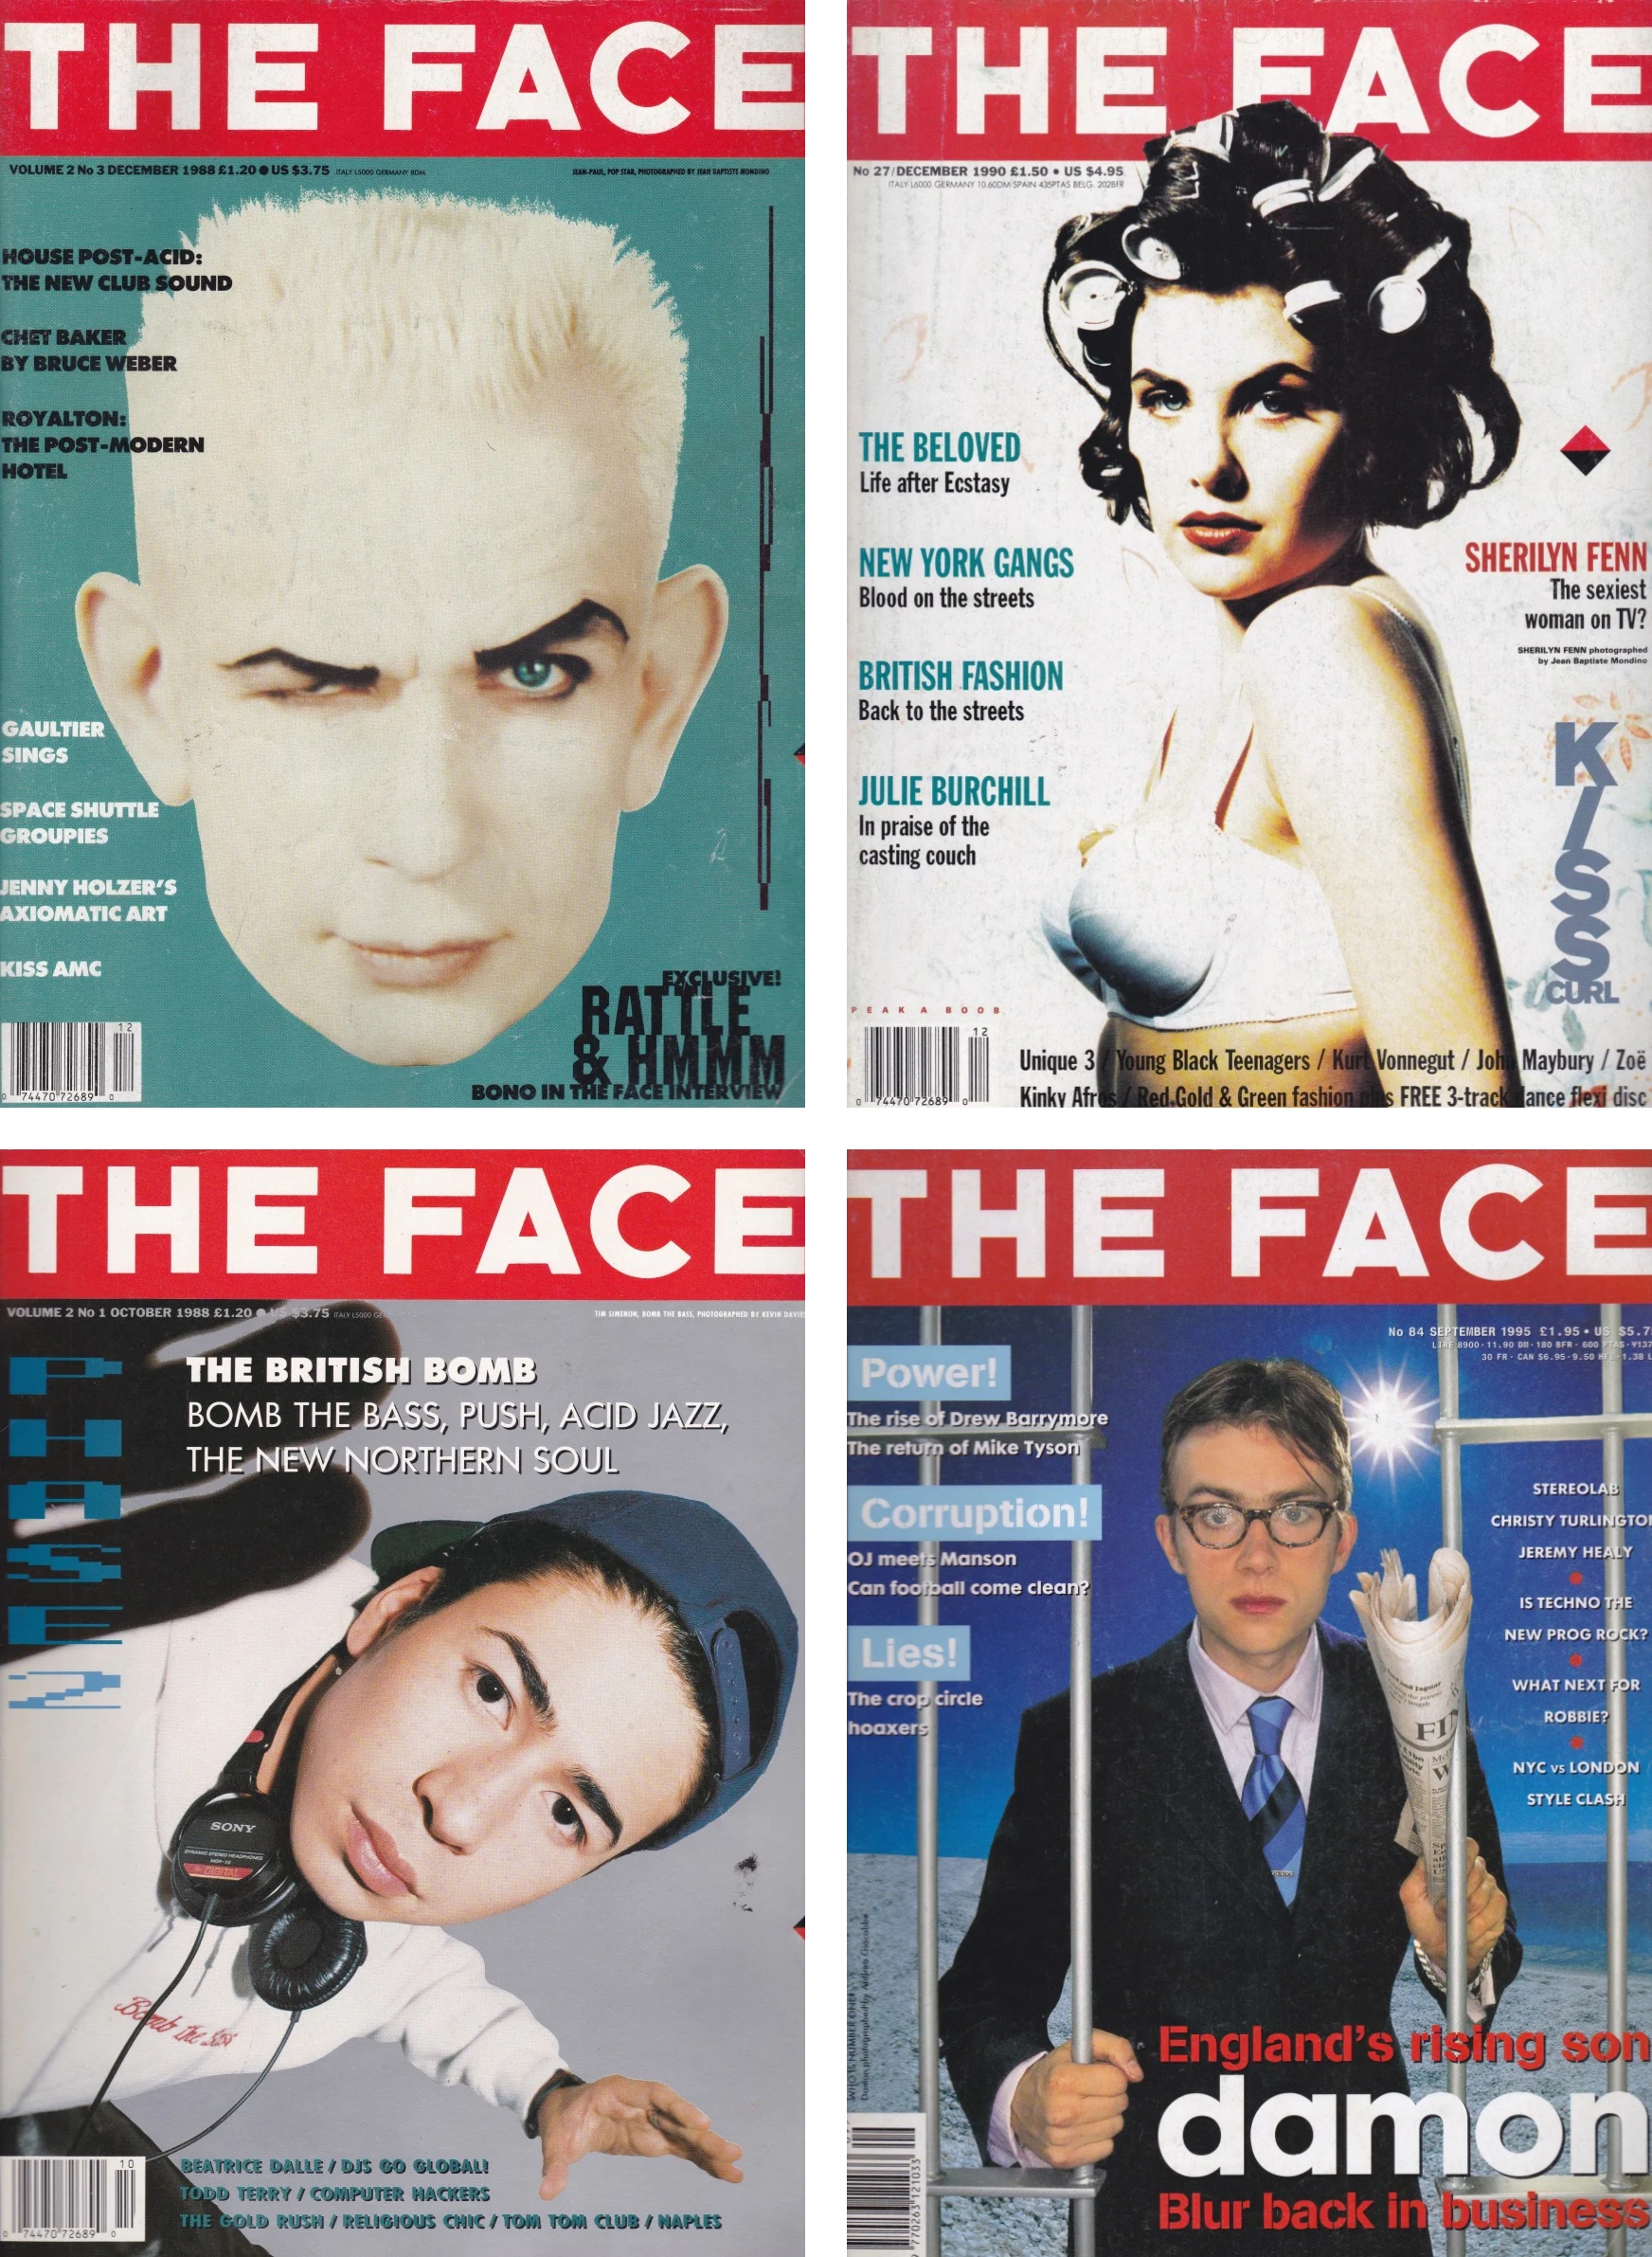 Cover stars of the Face magazine